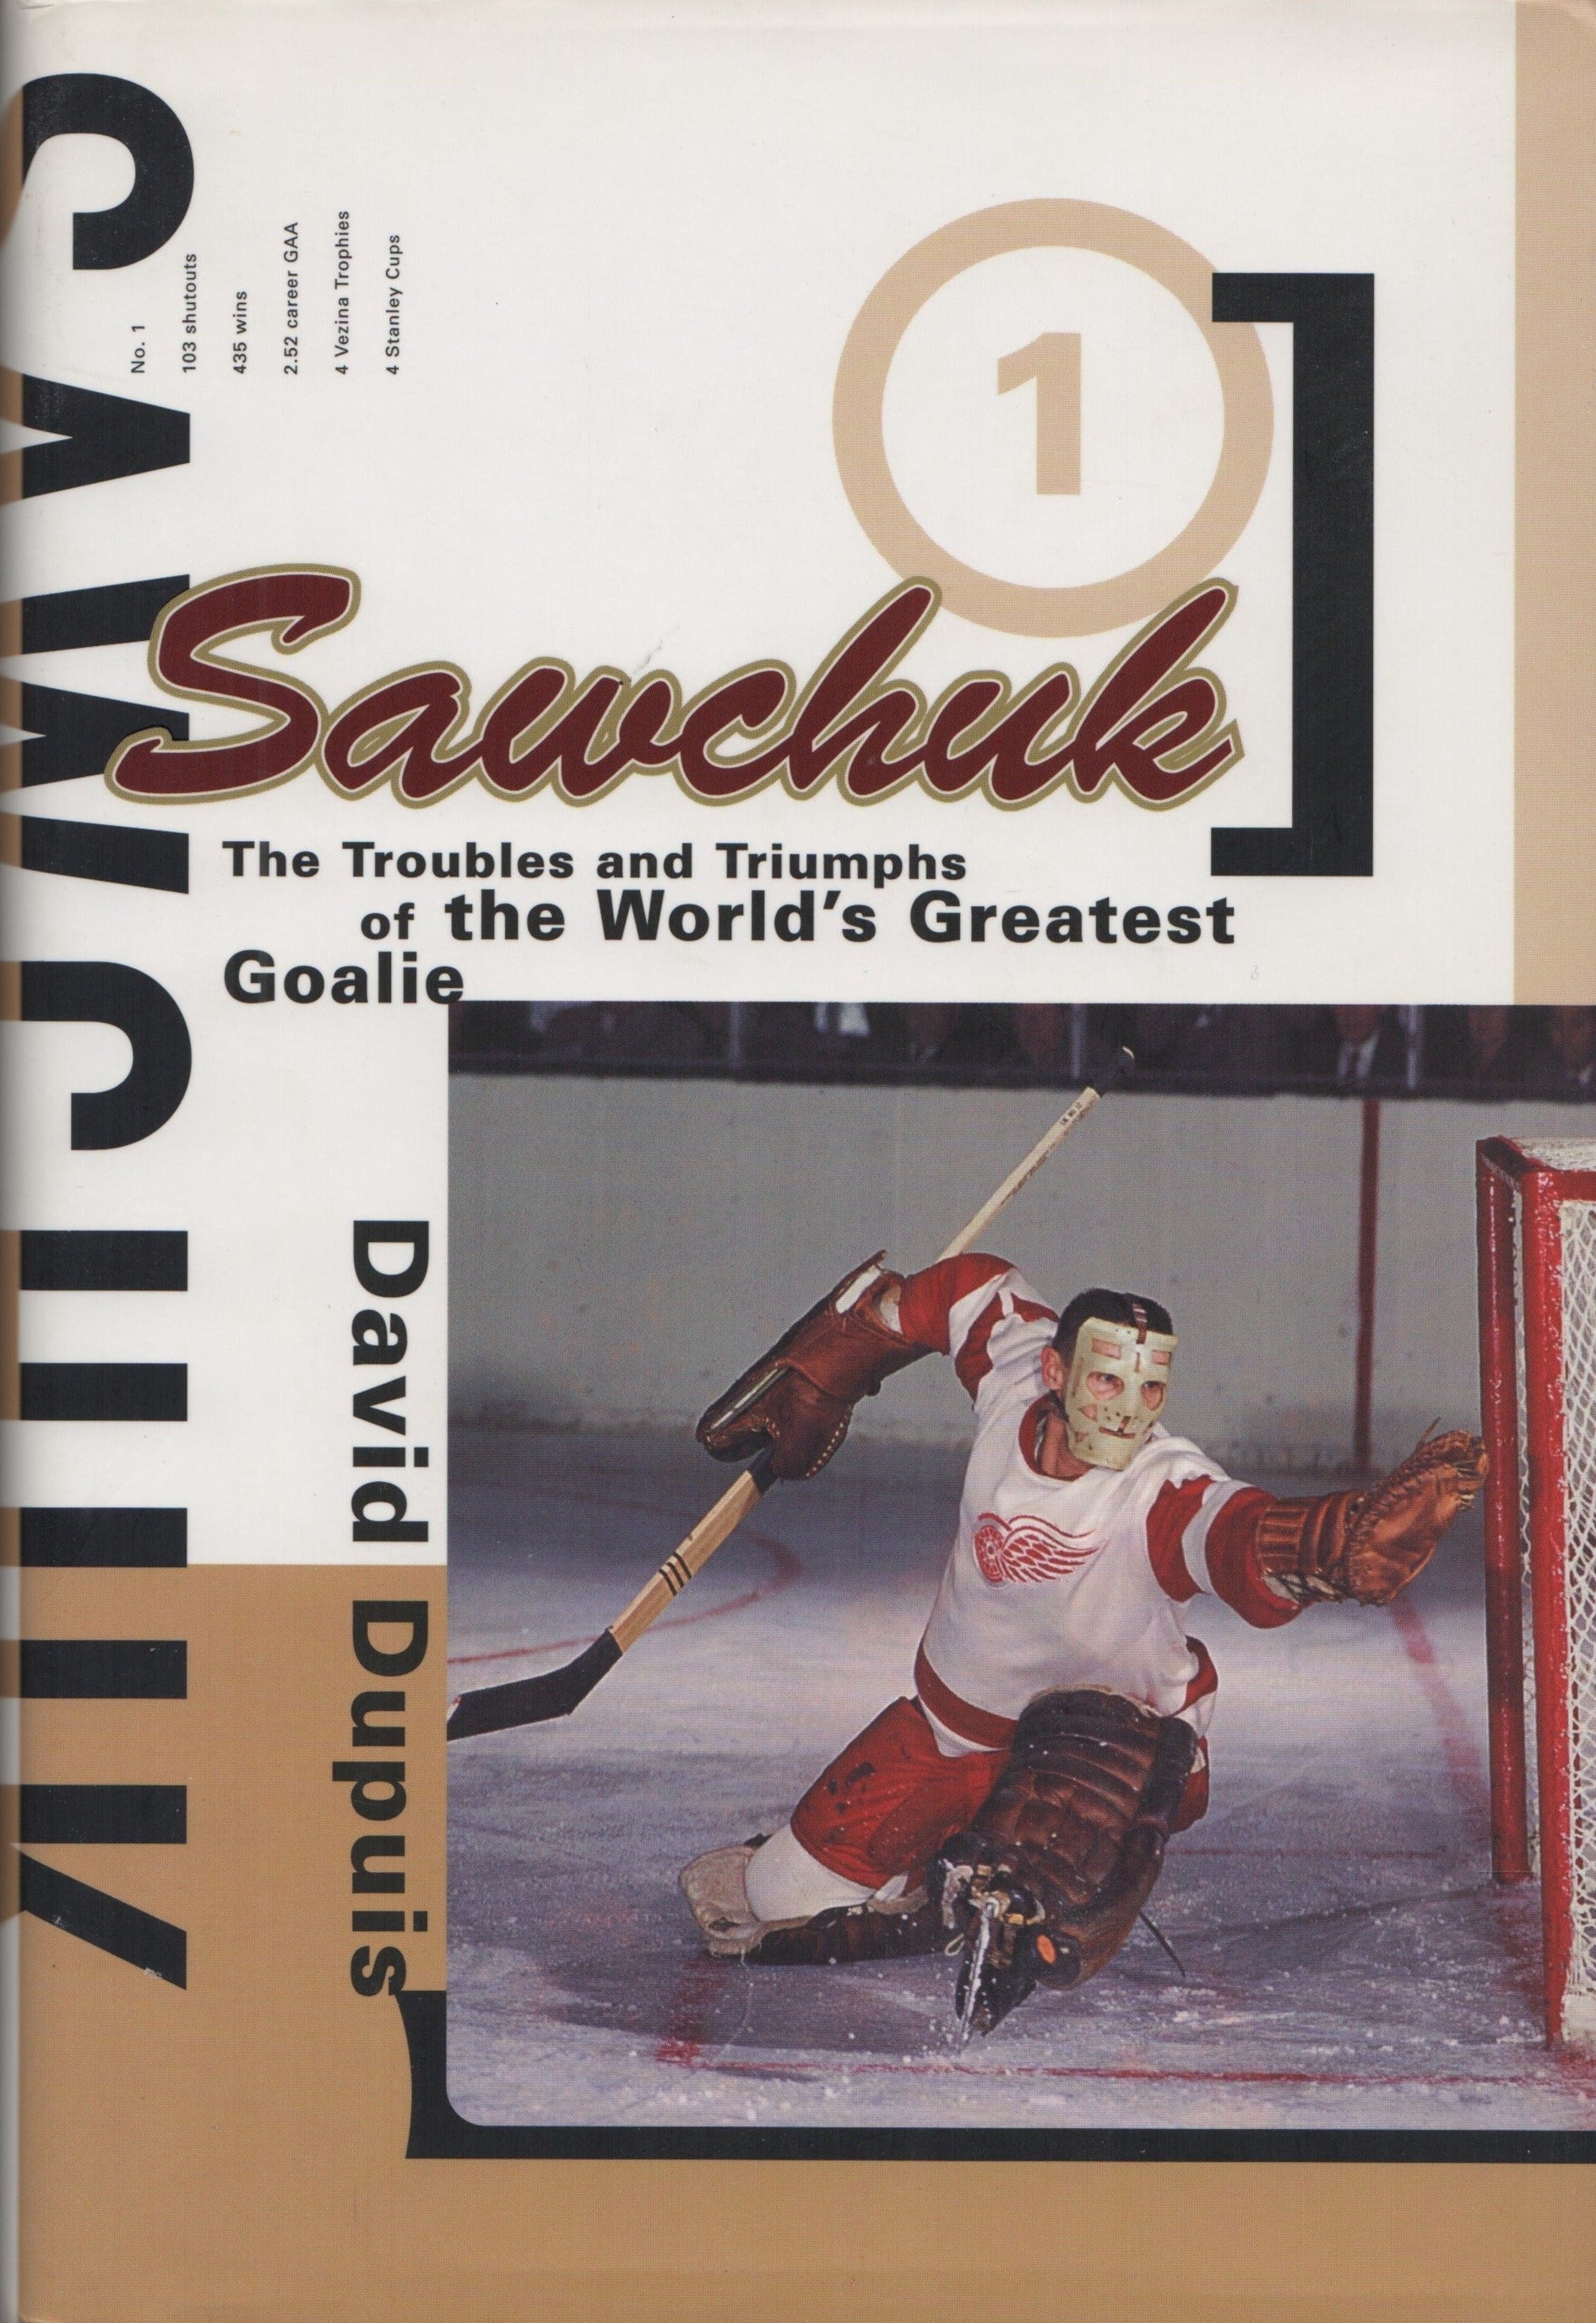 SAWCHUK, TERRY. Sawchuk : The troubles and Triumphs of the World's Greatest Goalie